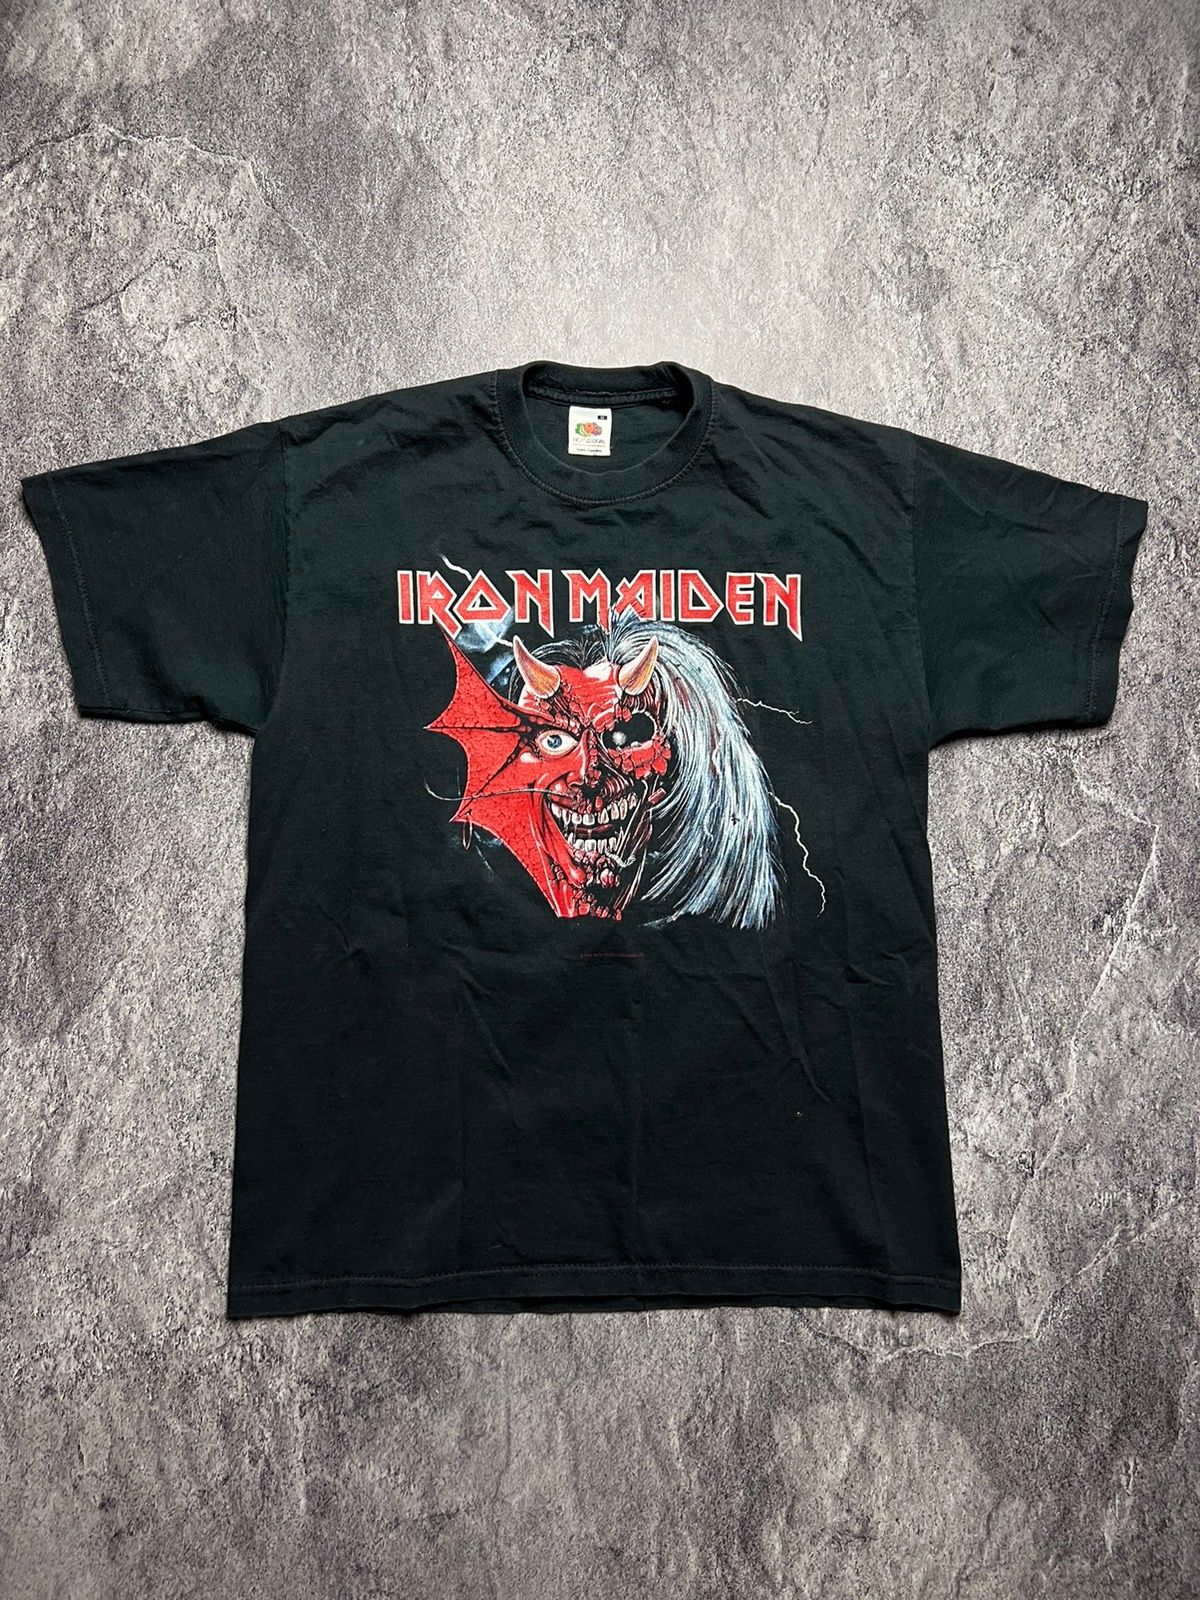 Pre-owned Band Tees X Iron Maiden 2004 Purgatory Tour Reprint Rock Band Tee In Black